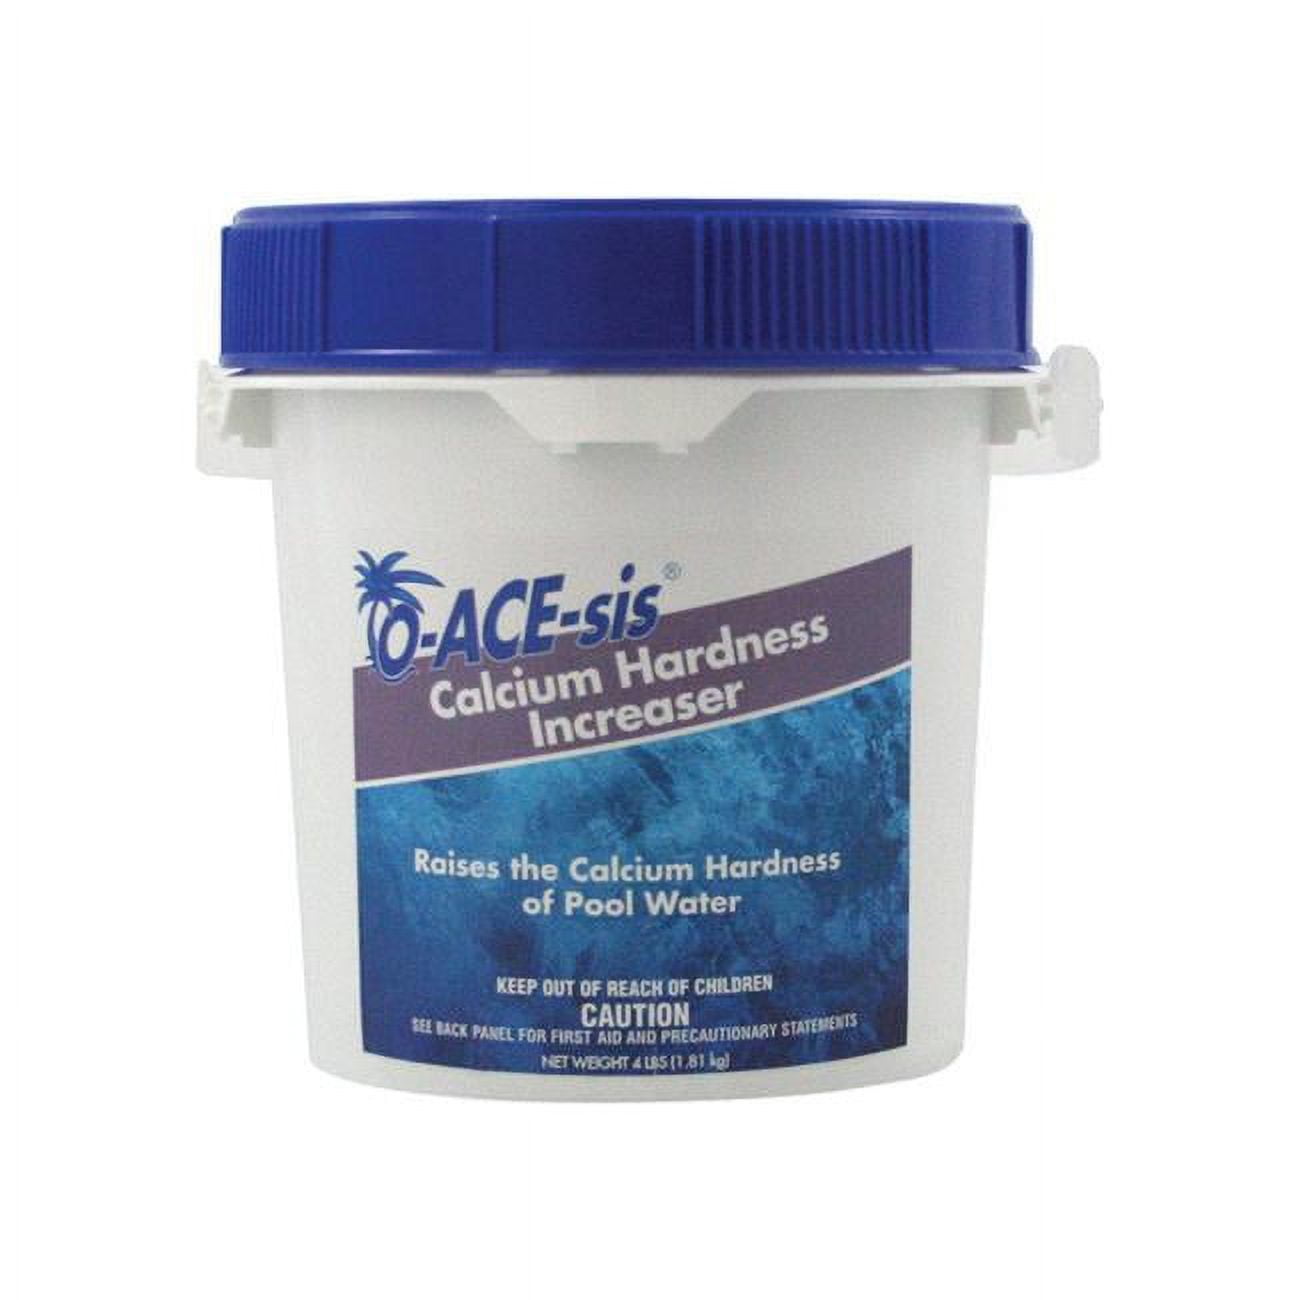 8191876 O-ACE-sis 4 lbs Calcium Hardness Increaser-  Pack of  8 -  WATER TECHNIQUES